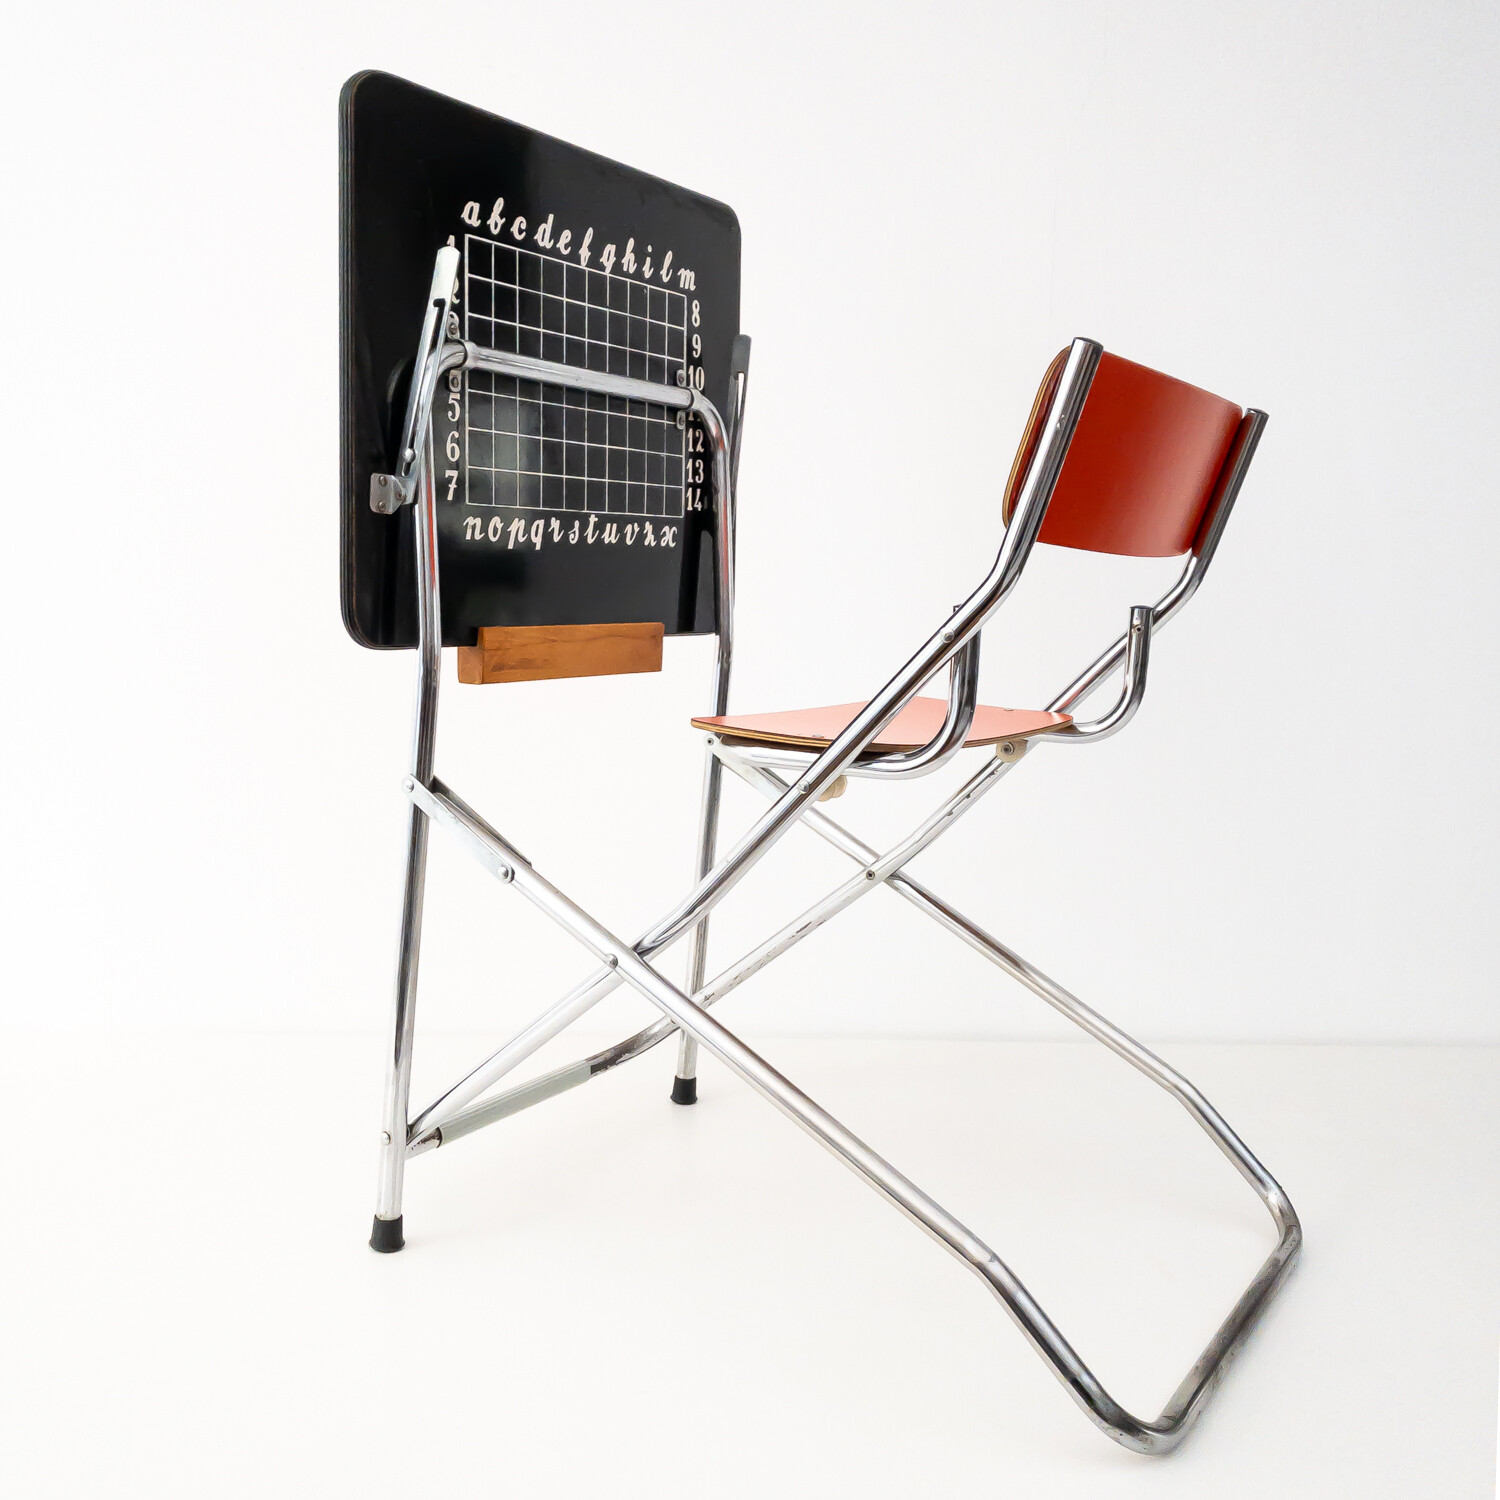 School desk with folding chair from the 1960s